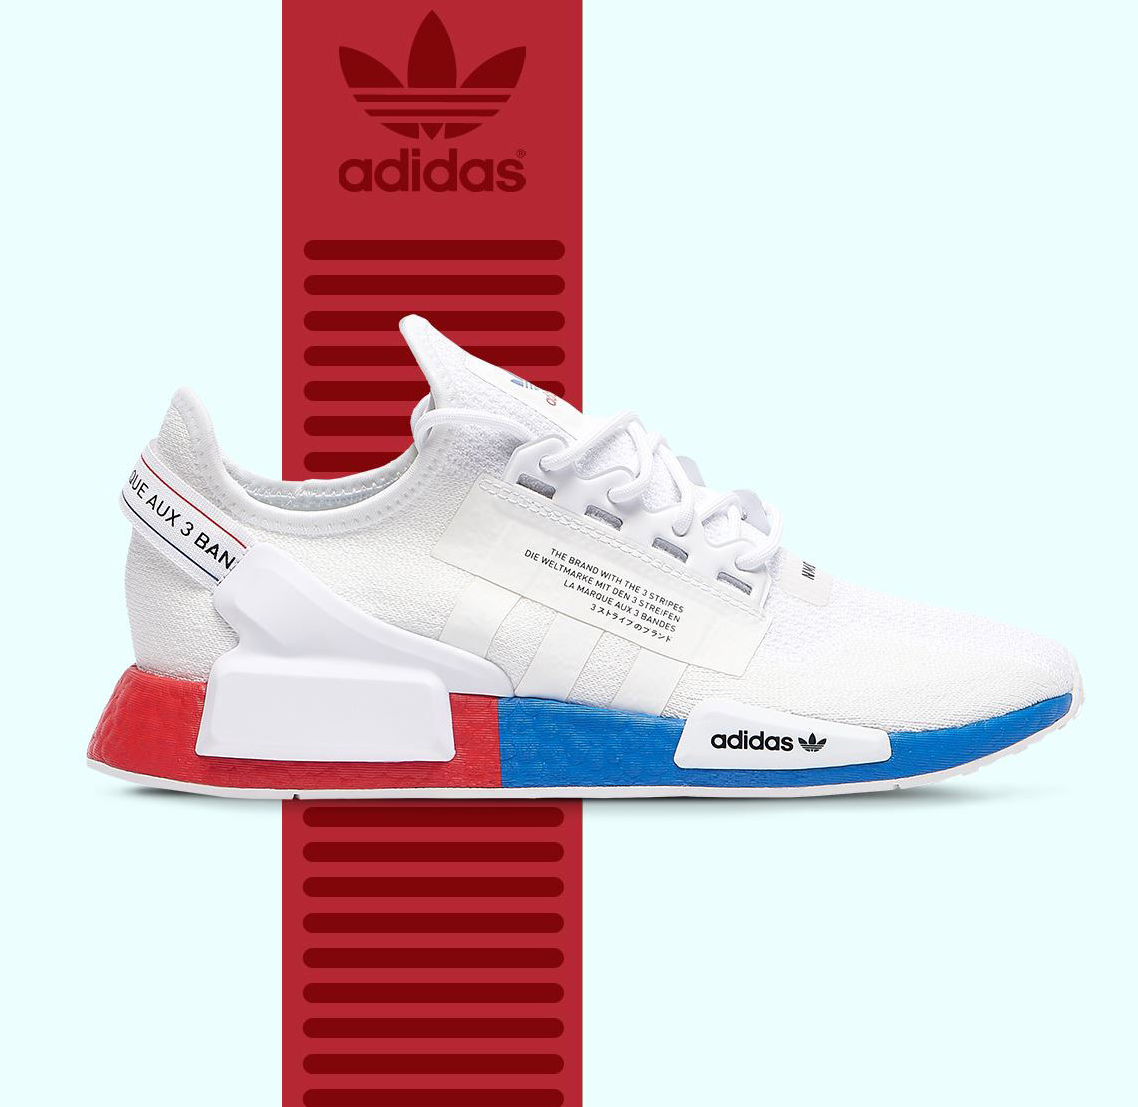 adidas NMD R1 V2 FV9021 Release Date